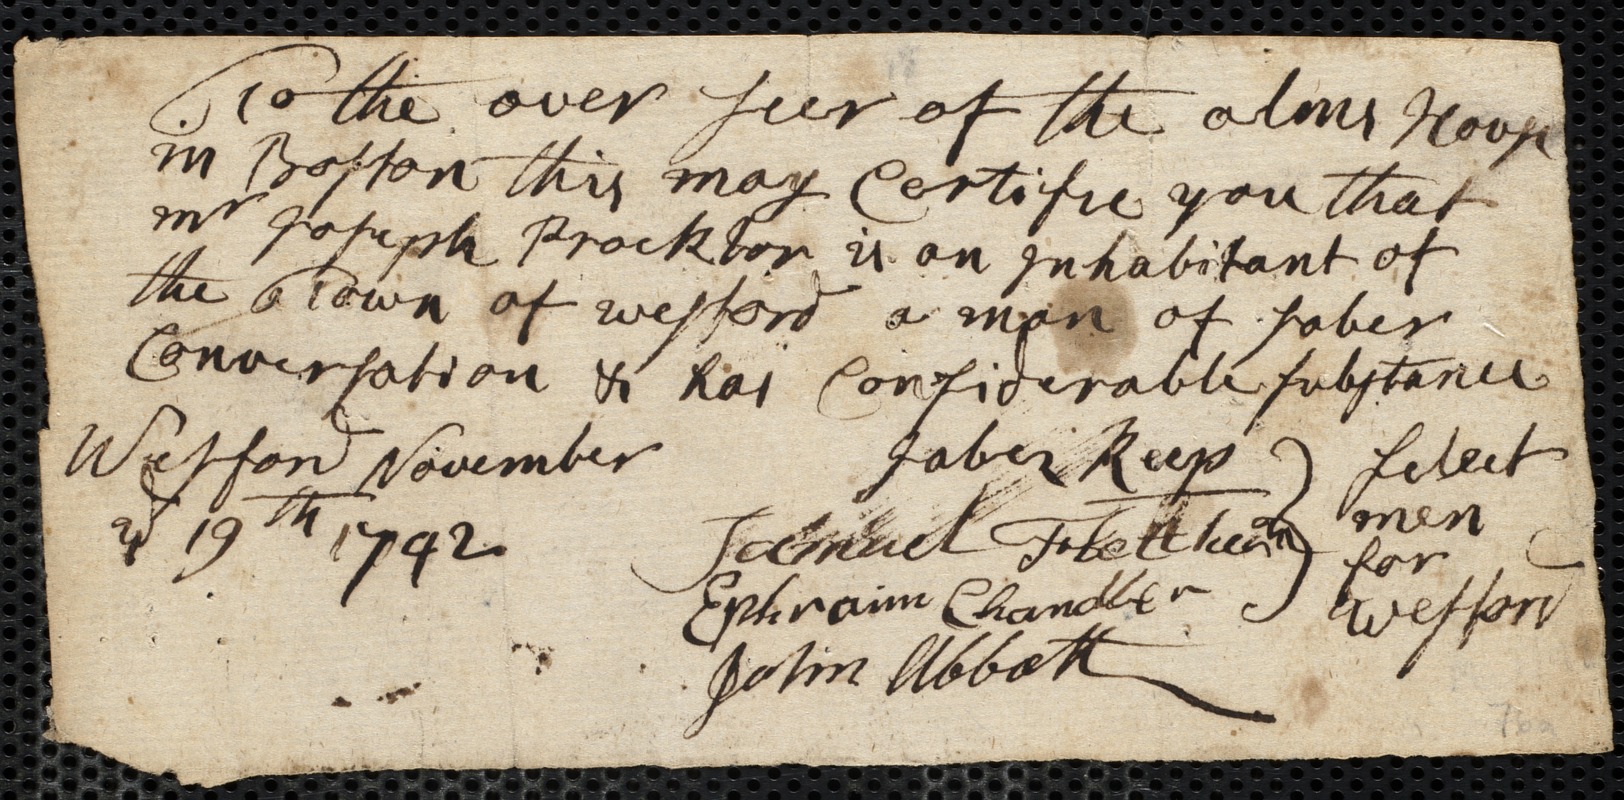 Richard Russell indentured to apprentice with Joseph Procter of Westford, 5 September 1744